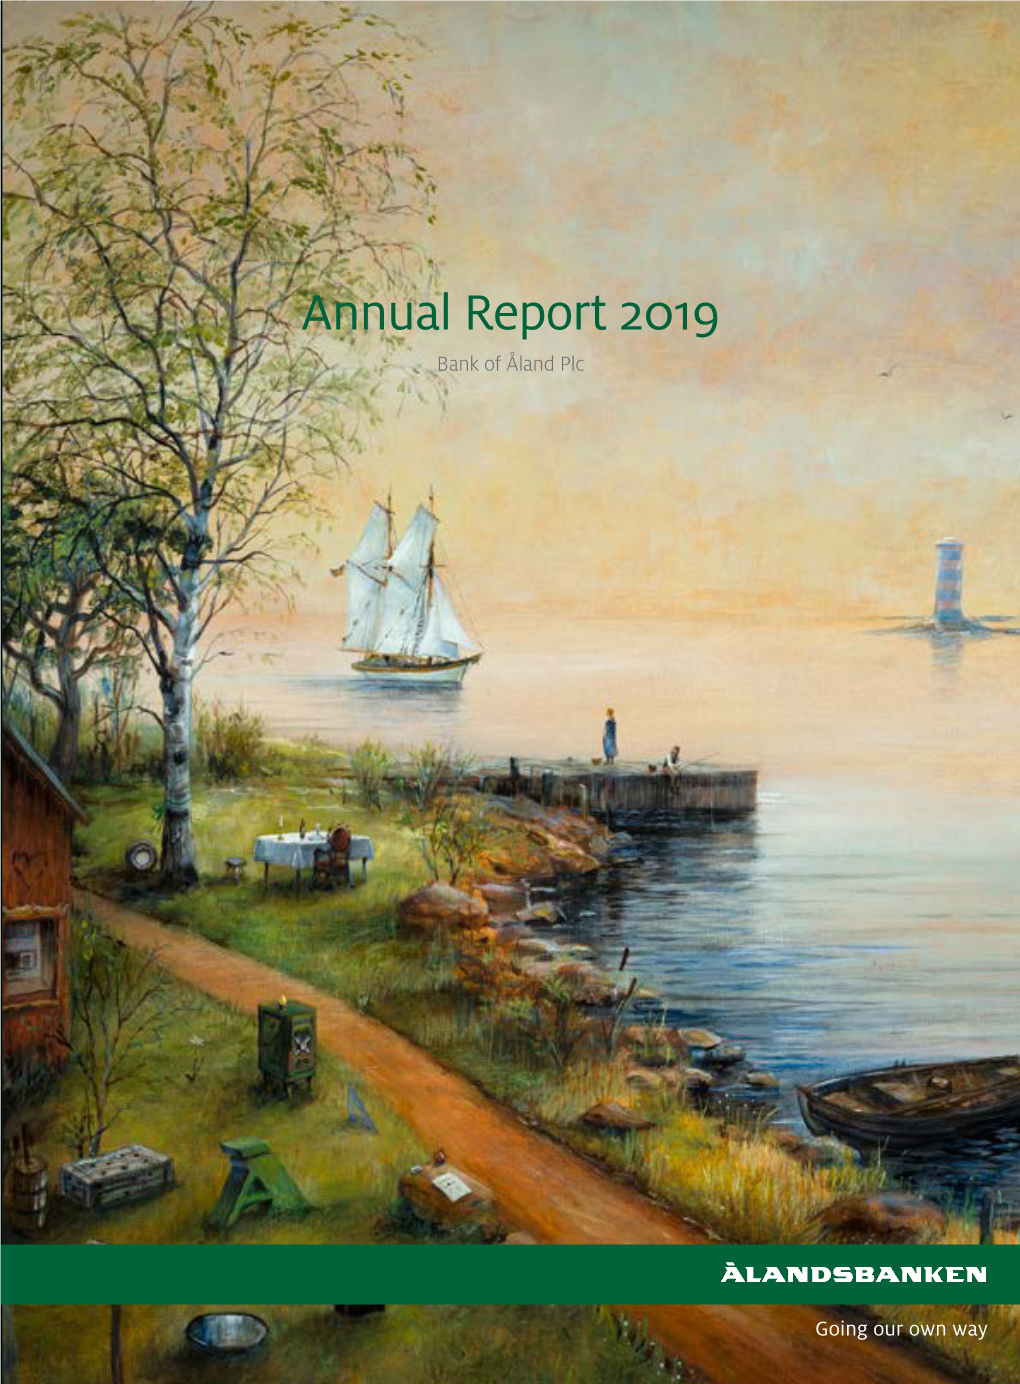 Annual Report 2019 Bank of Åland Plc